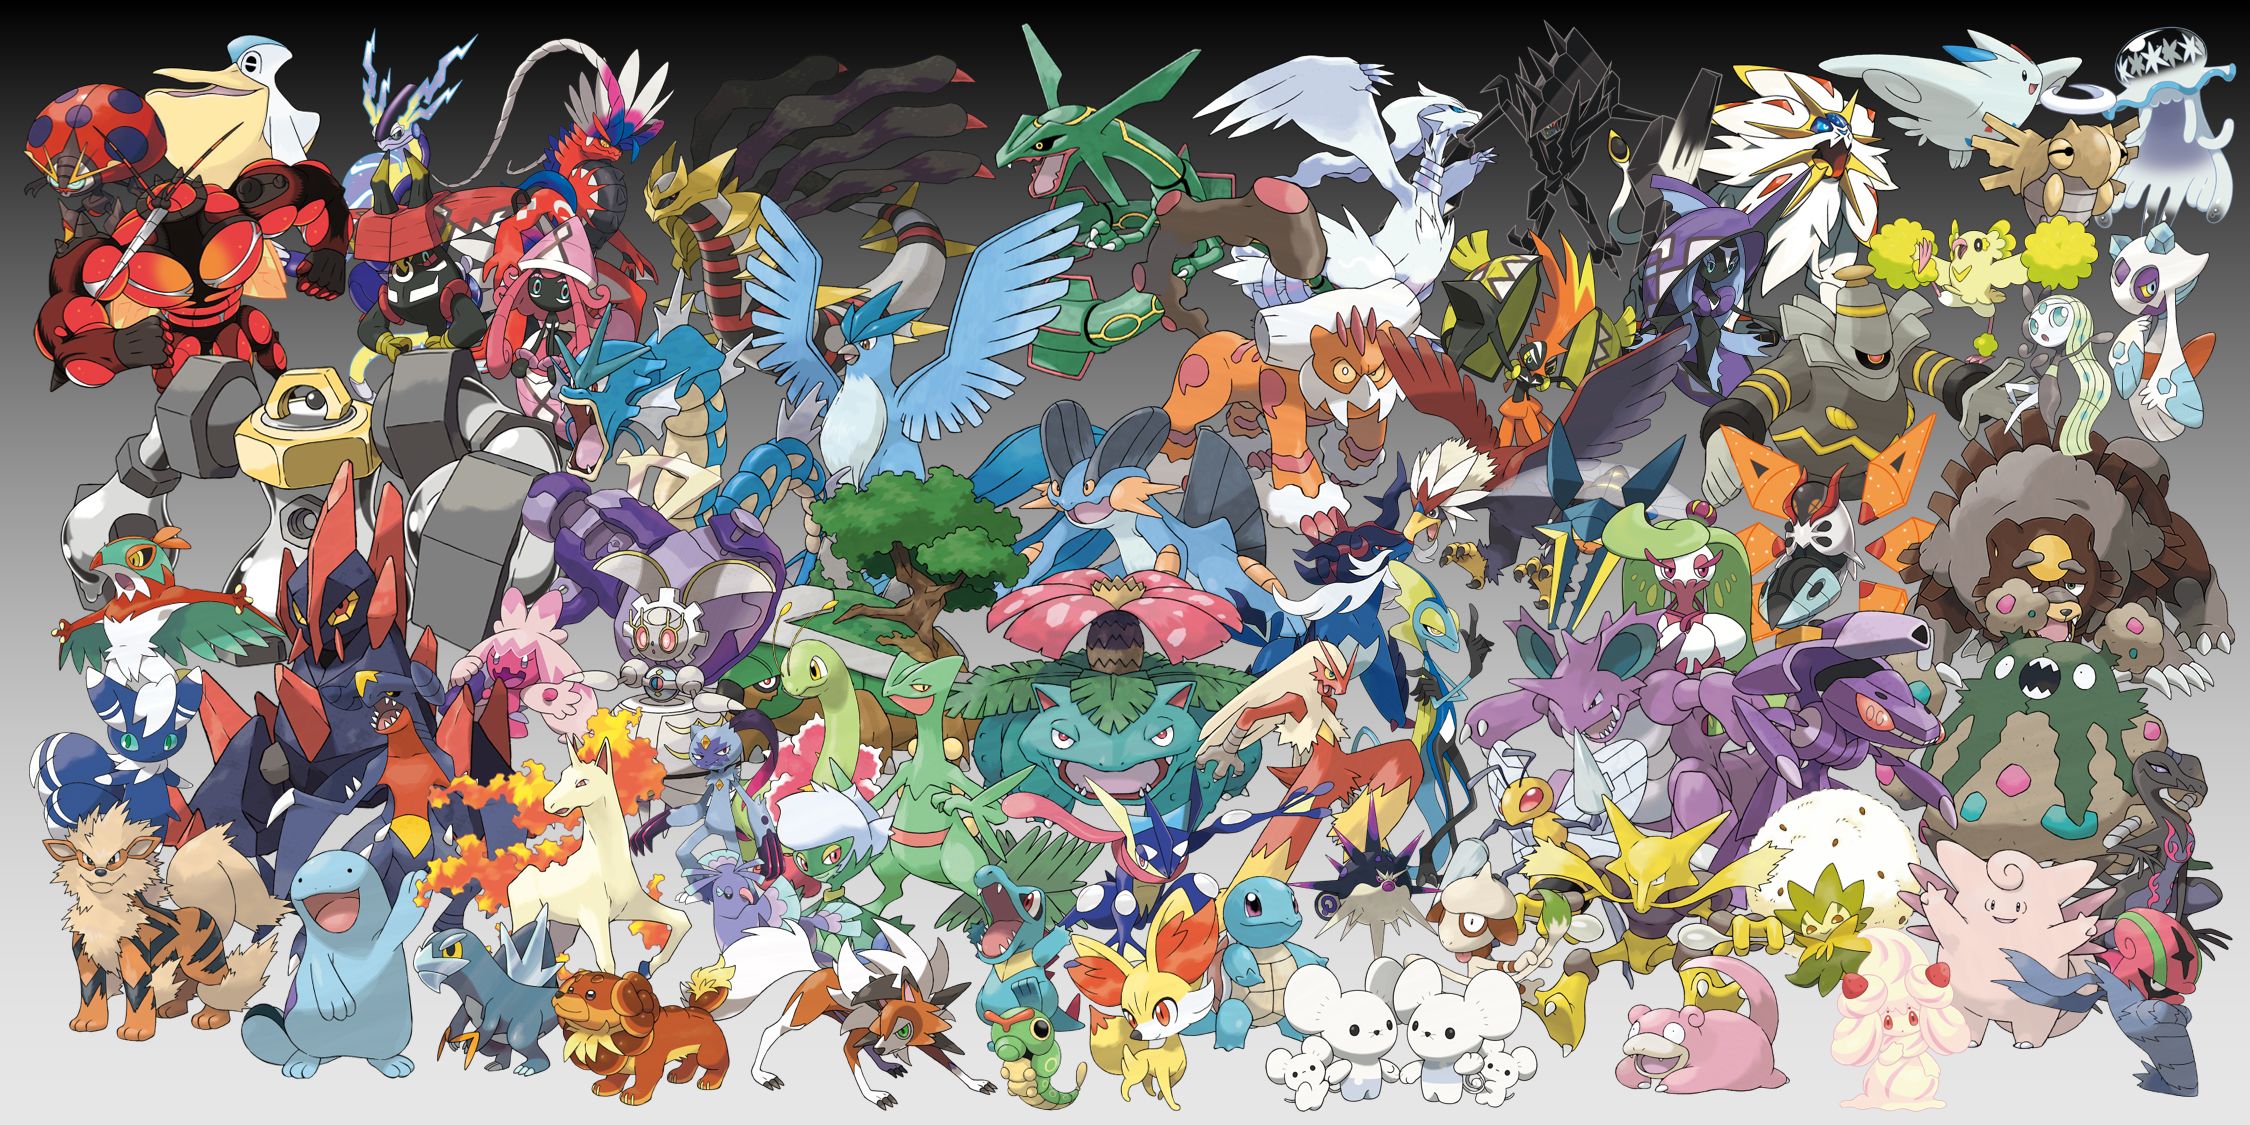 Pokemon with eight-letter names: Rayquaza, Squirtle, Greninja, Melmetal, Arcanine, and more.